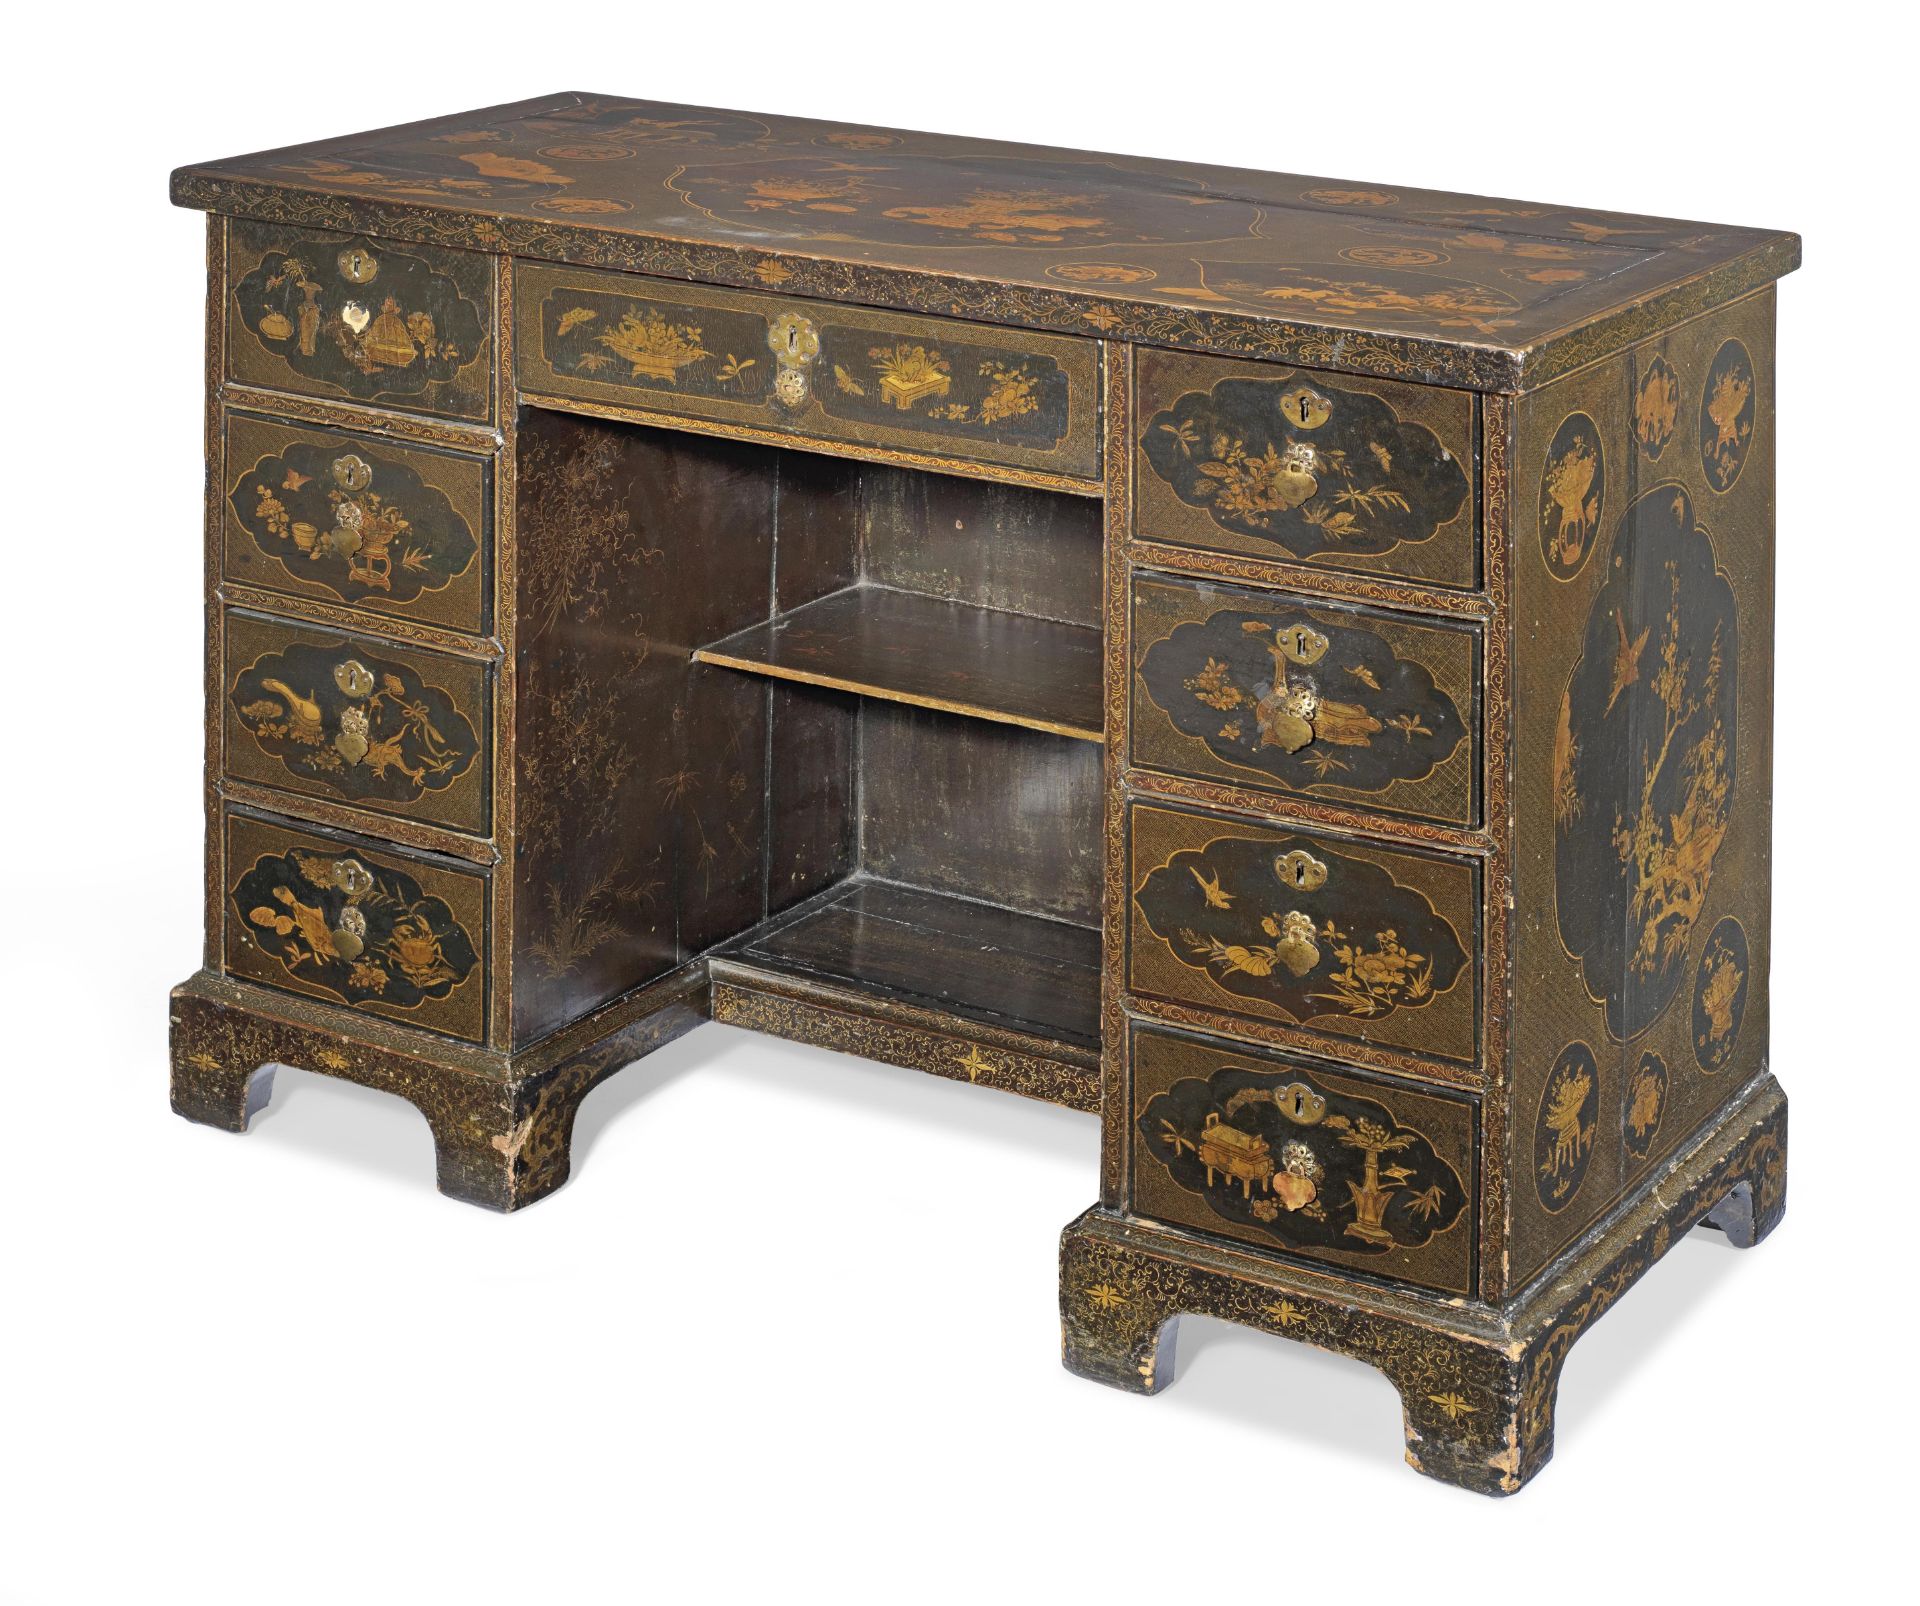 A Chinese export 18th century lacquer kneehole desk